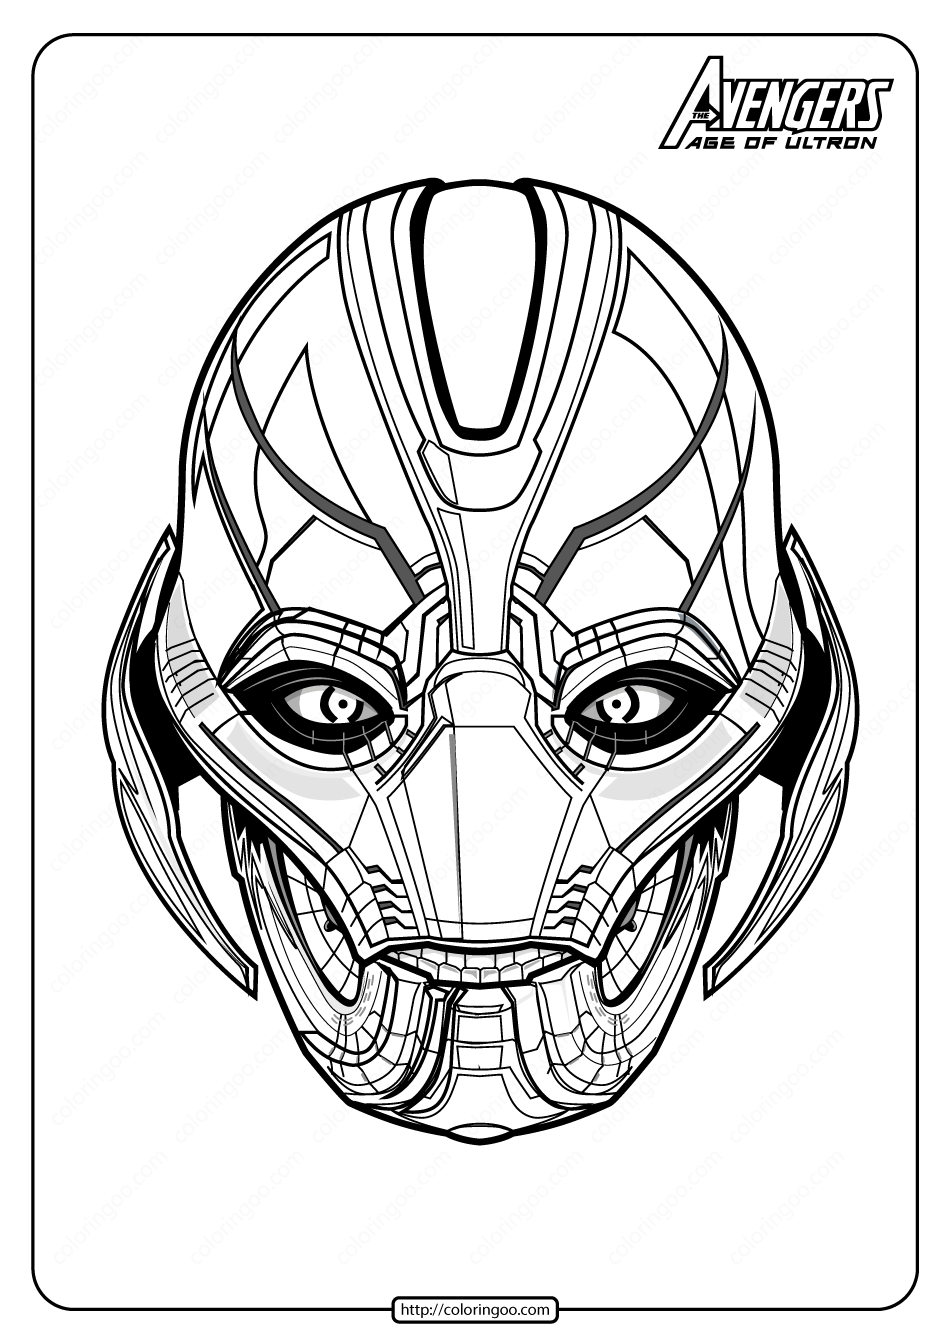 Marvel Avengers Ultron Pdf Coloring Pages